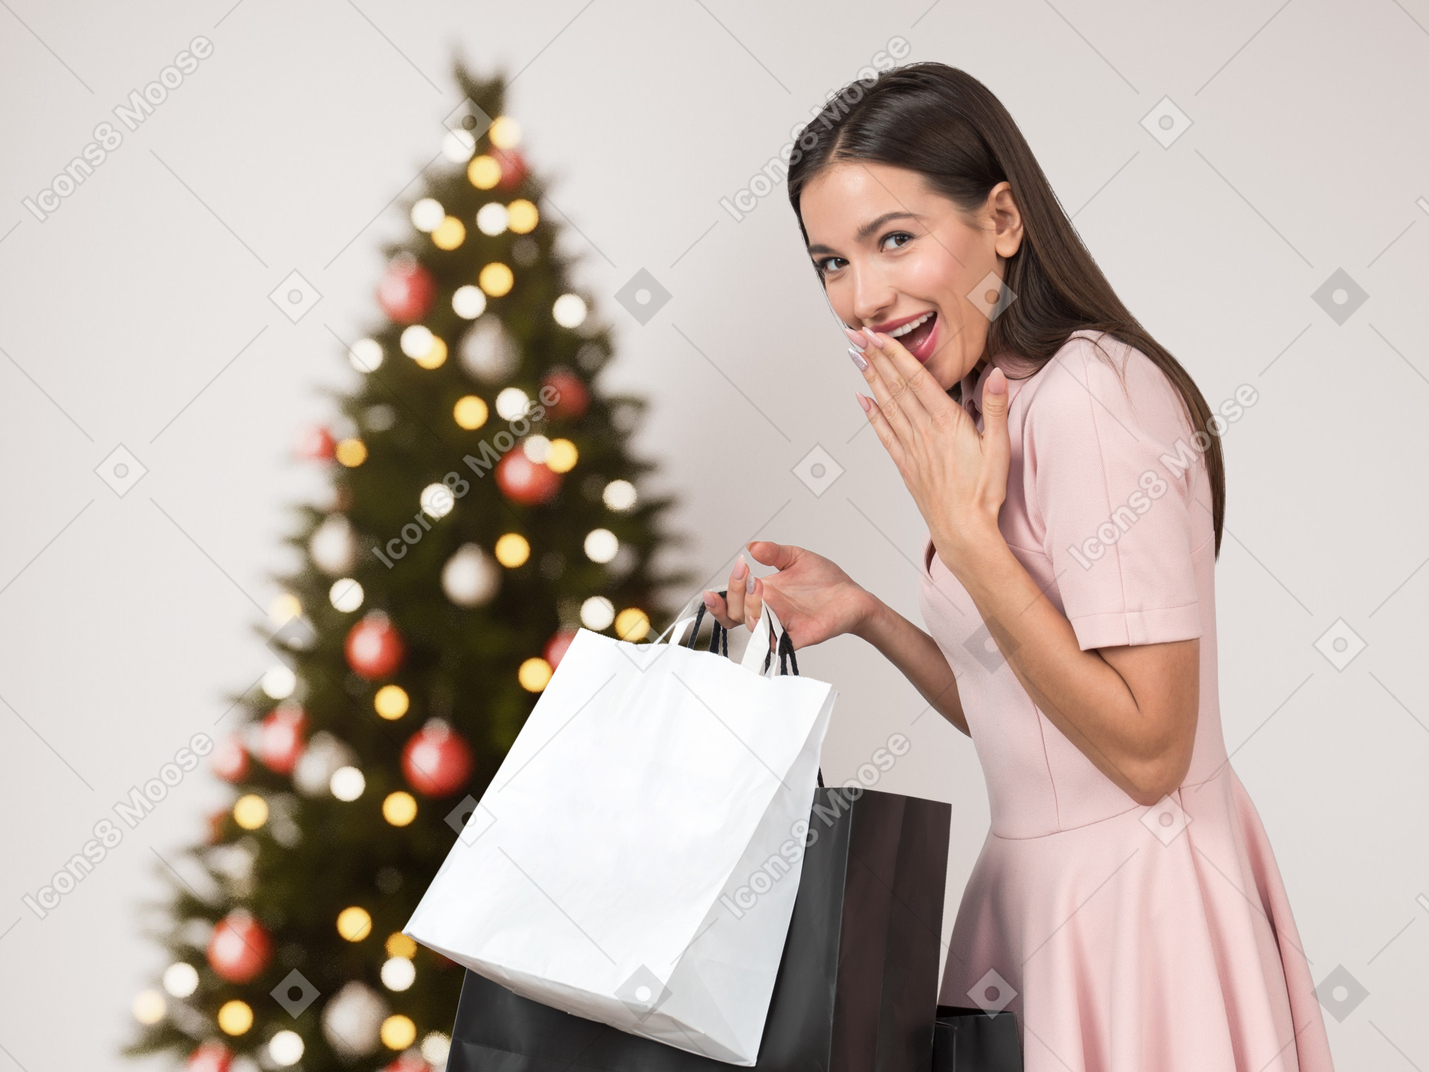 Young woman with shopping bags standing near christmas tree